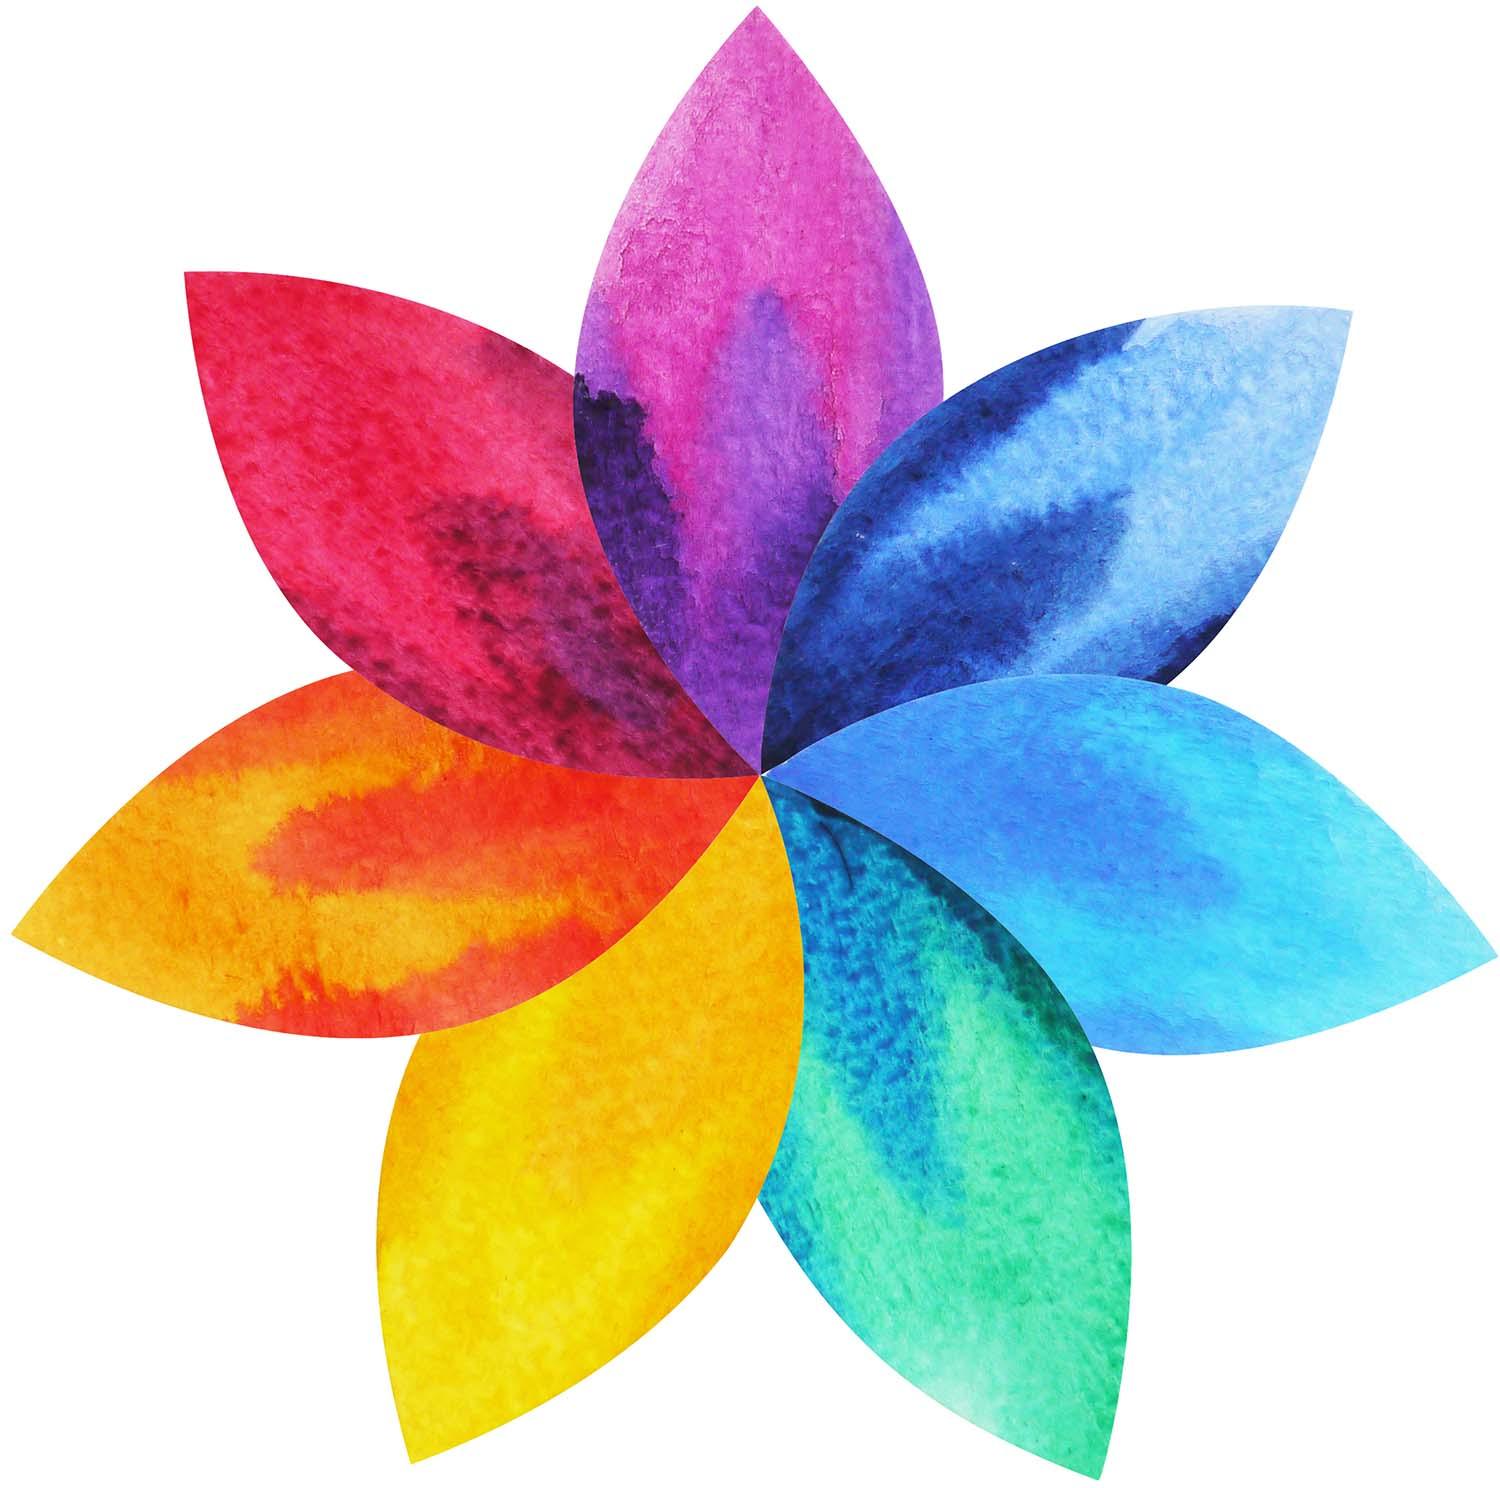 7 colour chakra sign symbol, lotus flower icon, watercolor: Peel-N-Stick wall decal